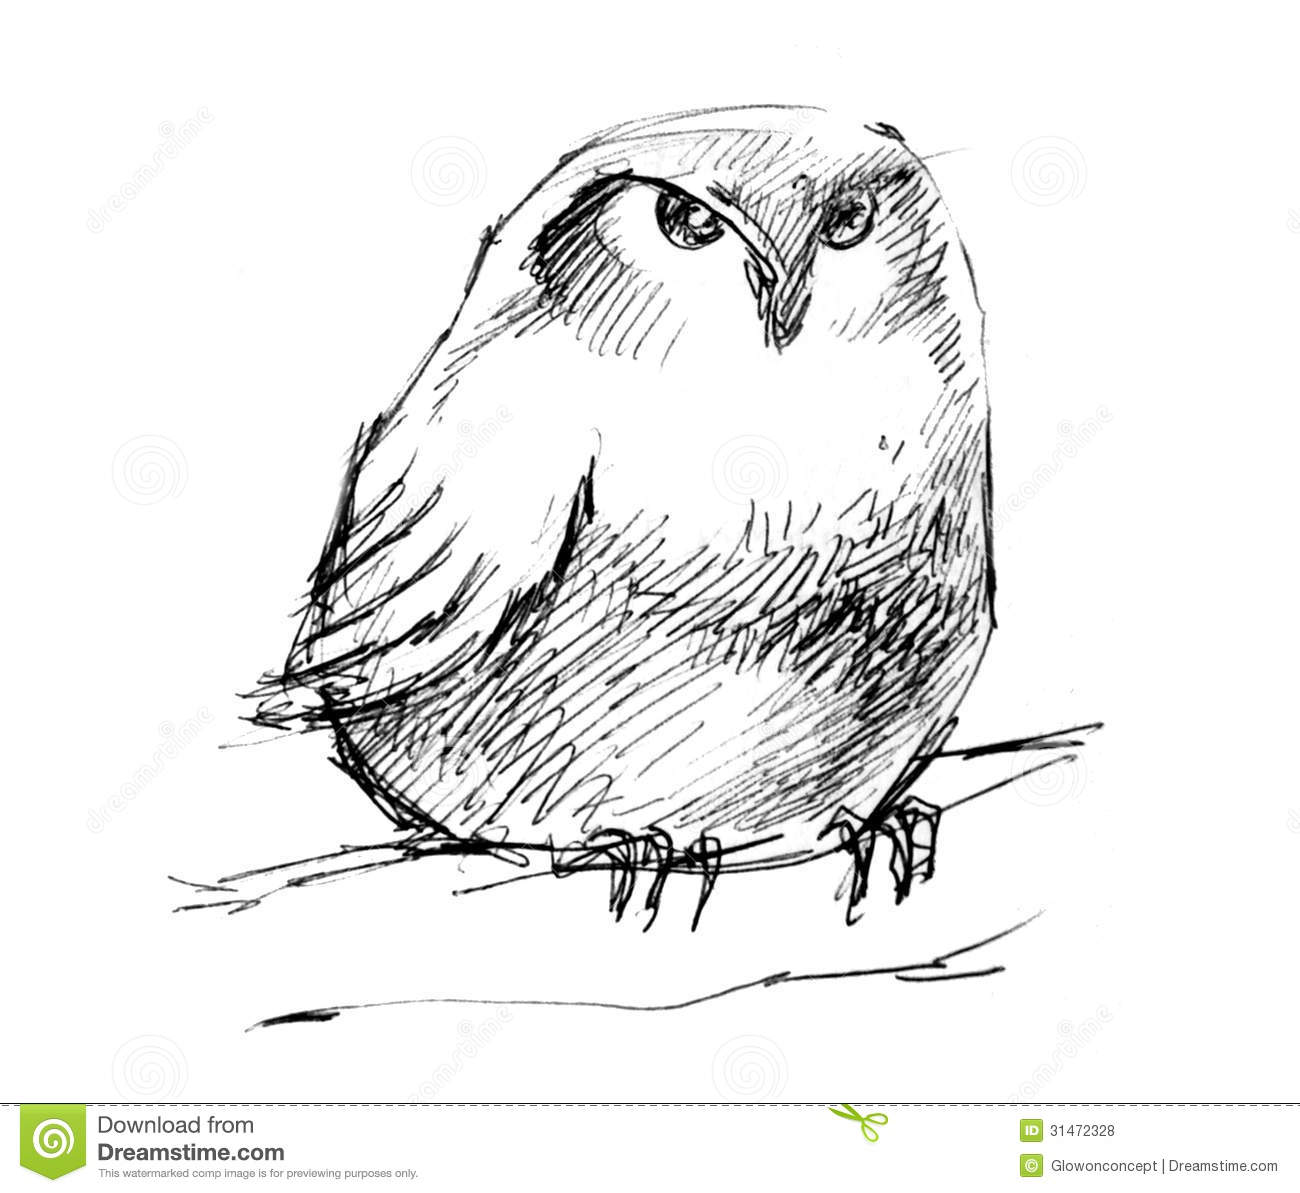 Puffy Owl Pencil Drawing Royalty Free Stock Photos   Image  31472328